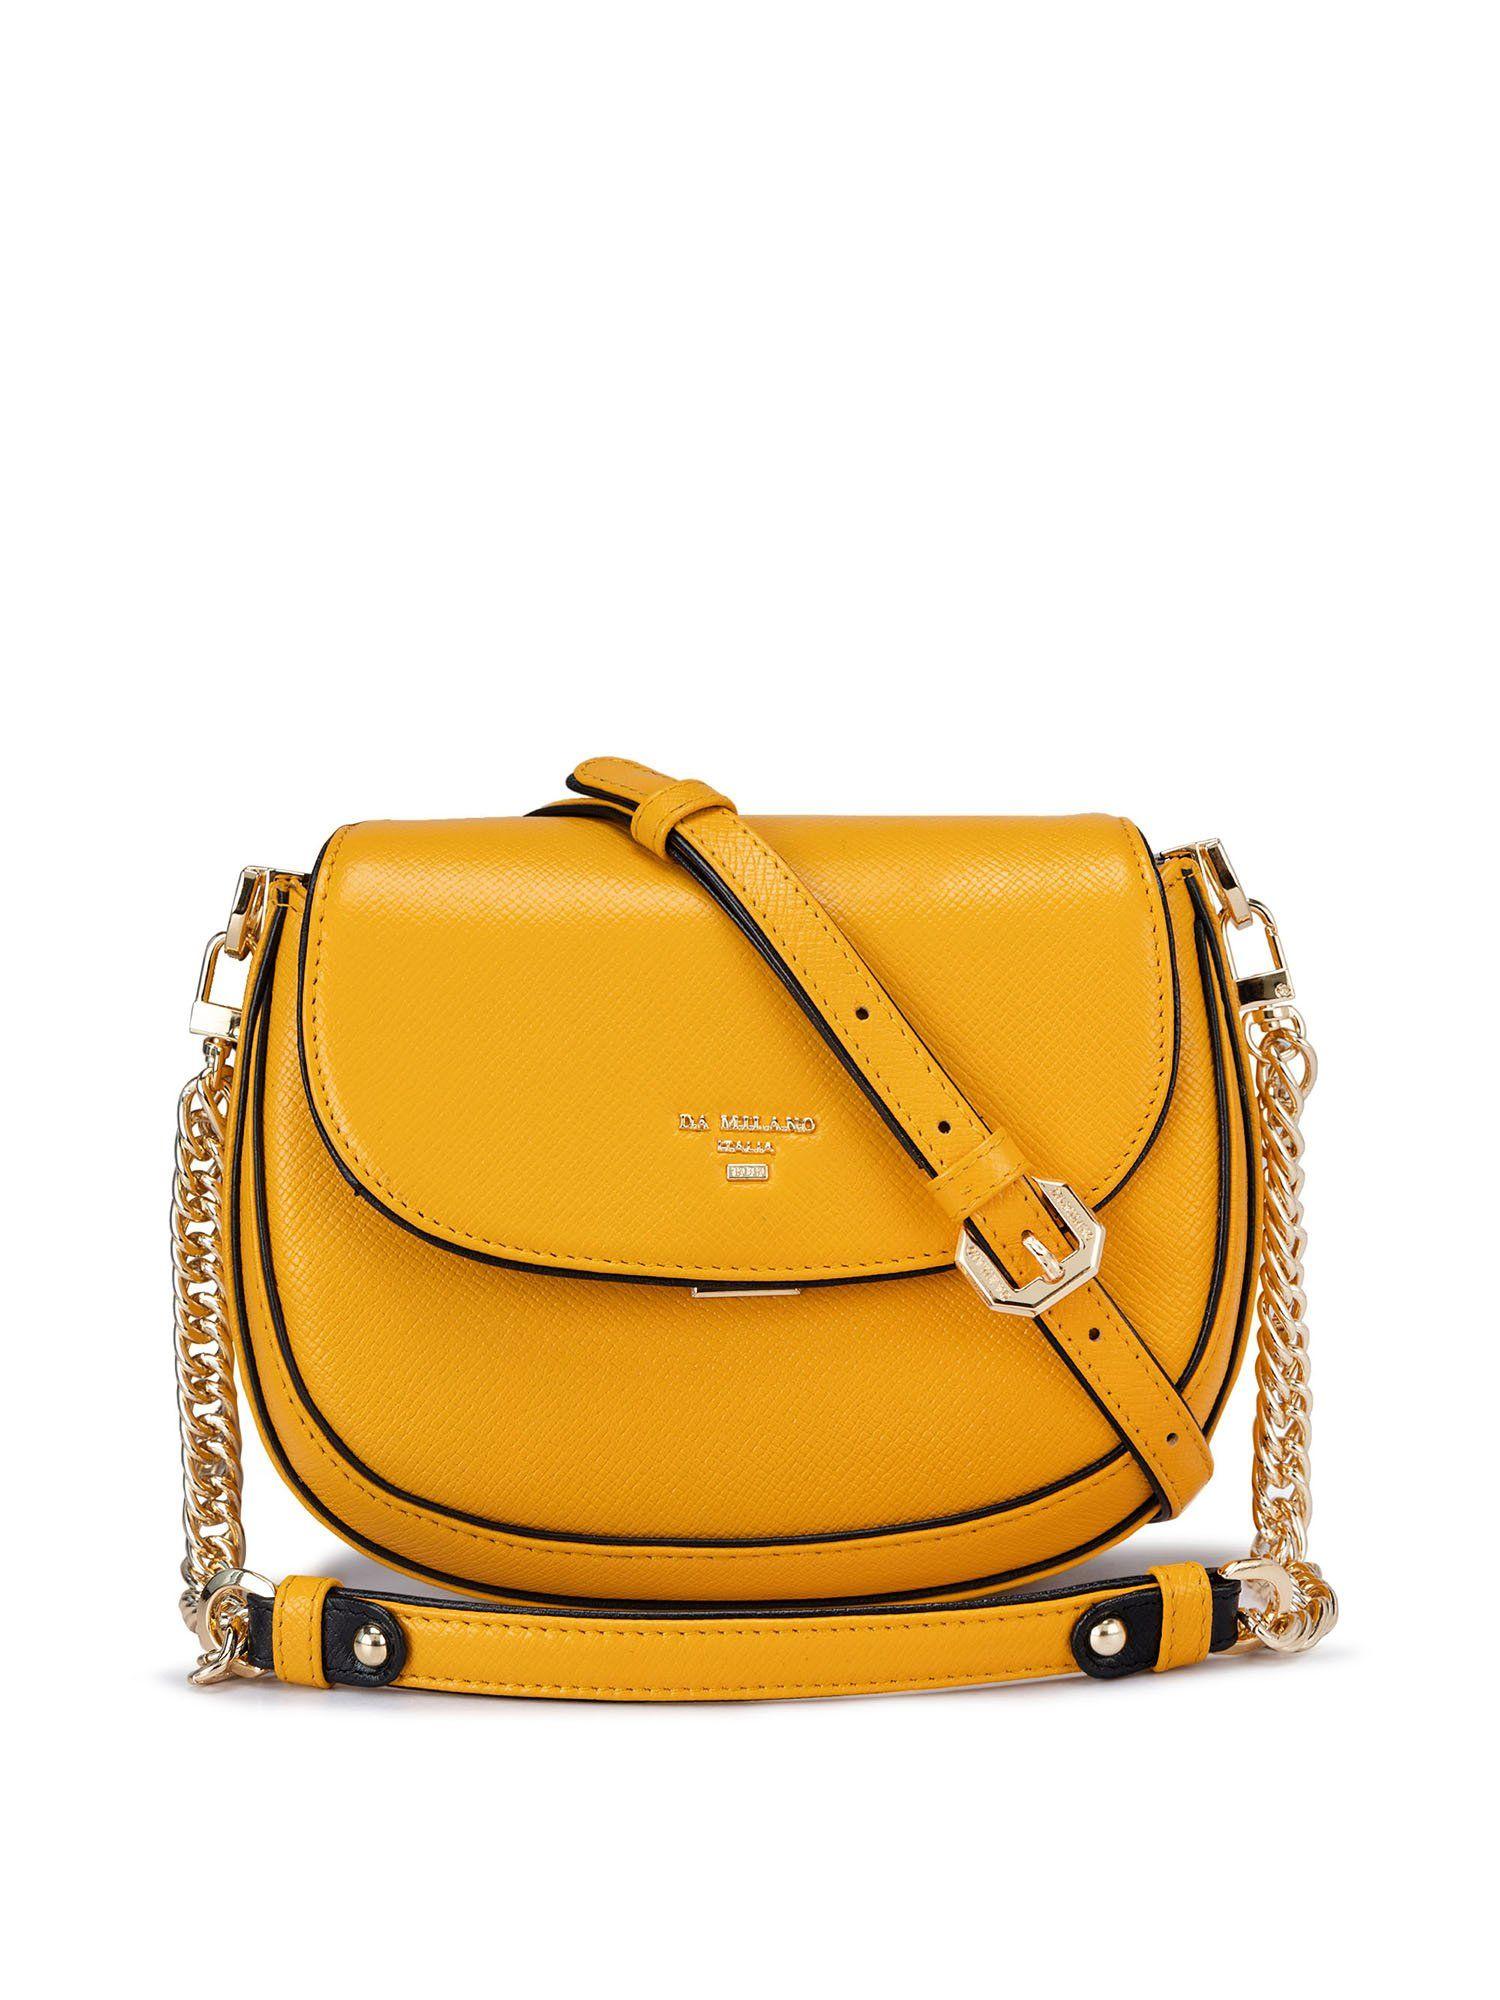 genuine leather yellow sling bag